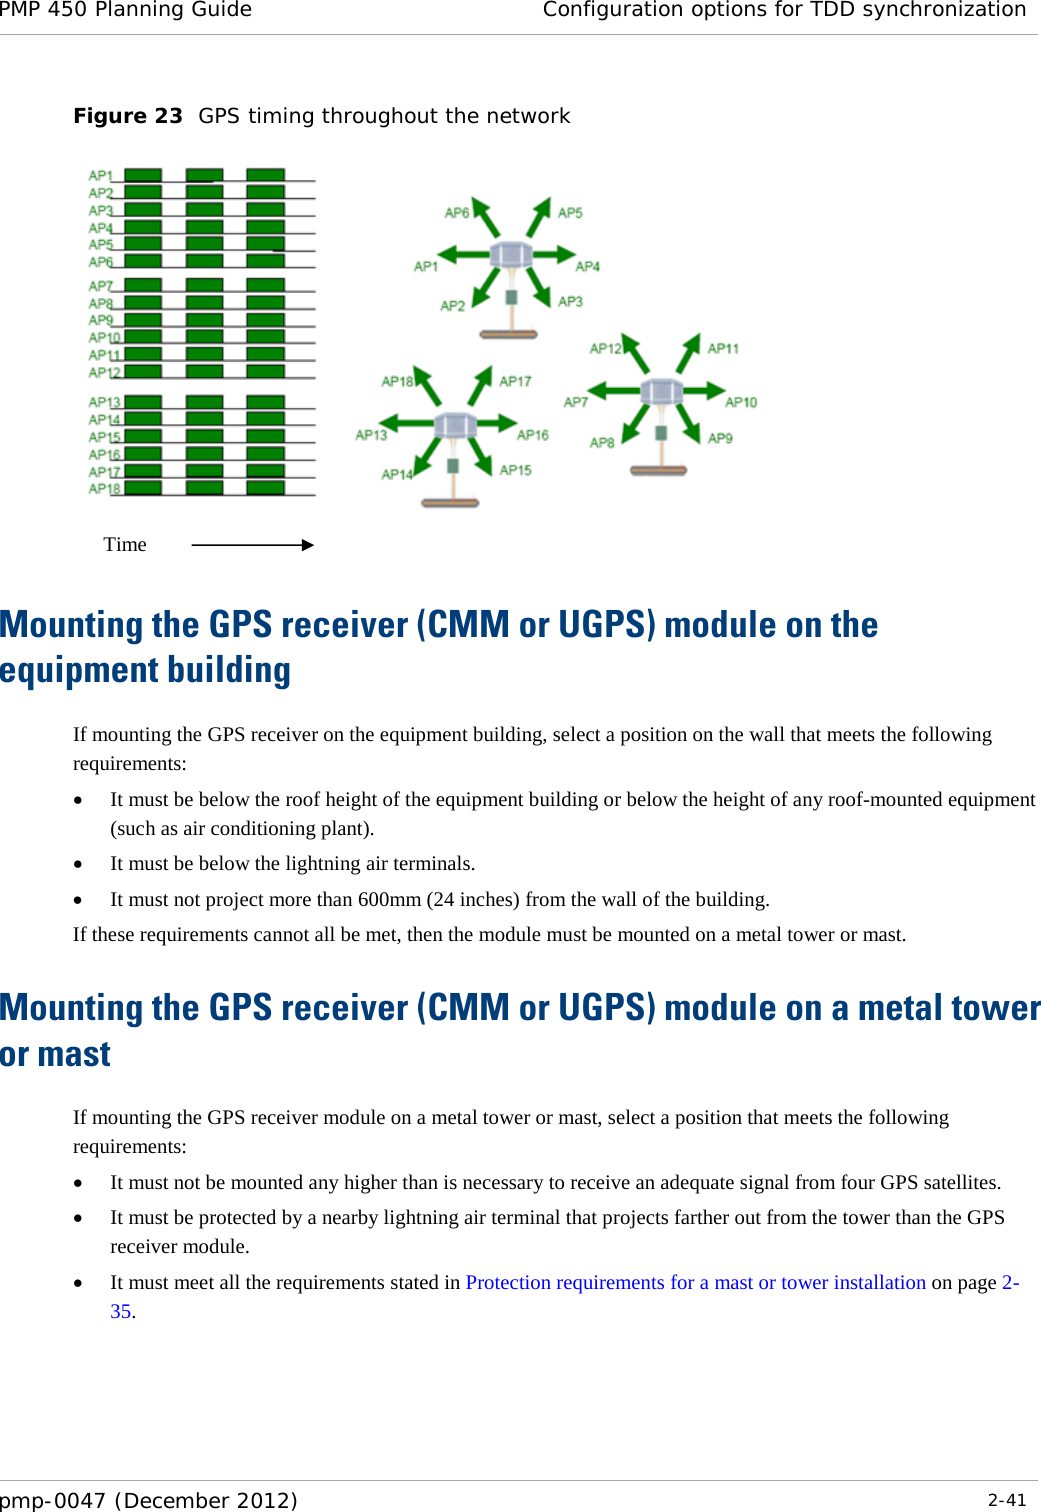 PMP 450 Planning Guide Configuration options for TDD synchronization  pmp-0047 (December 2012)  2-41  Figure 23  GPS timing throughout the network   Mounting the GPS receiver (CMM or UGPS) module on the equipment building If mounting the GPS receiver on the equipment building, select a position on the wall that meets the following requirements: • It must be below the roof height of the equipment building or below the height of any roof-mounted equipment (such as air conditioning plant). • It must be below the lightning air terminals. • It must not project more than 600mm (24 inches) from the wall of the building. If these requirements cannot all be met, then the module must be mounted on a metal tower or mast. Mounting the GPS receiver (CMM or UGPS) module on a metal tower or mast If mounting the GPS receiver module on a metal tower or mast, select a position that meets the following requirements: • It must not be mounted any higher than is necessary to receive an adequate signal from four GPS satellites. • It must be protected by a nearby lightning air terminal that projects farther out from the tower than the GPS receiver module. • It must meet all the requirements stated in Protection requirements for a mast or tower installation on page 2-35.  Time 